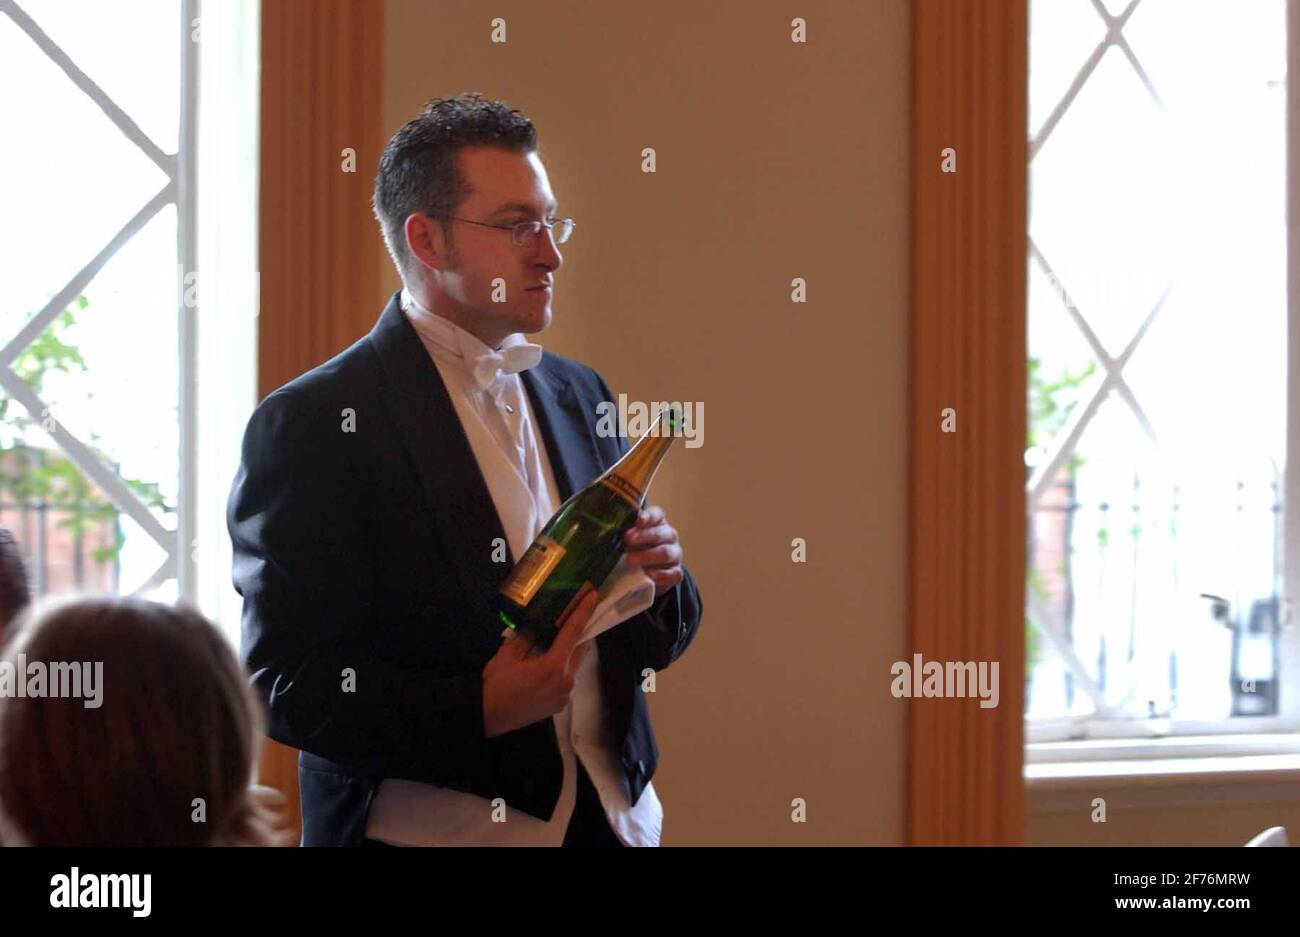 CRAIG MCKAY AT THE YOUNG CHEF/WAITER OF THE YEAR.131003 PILSTON Stock Photo